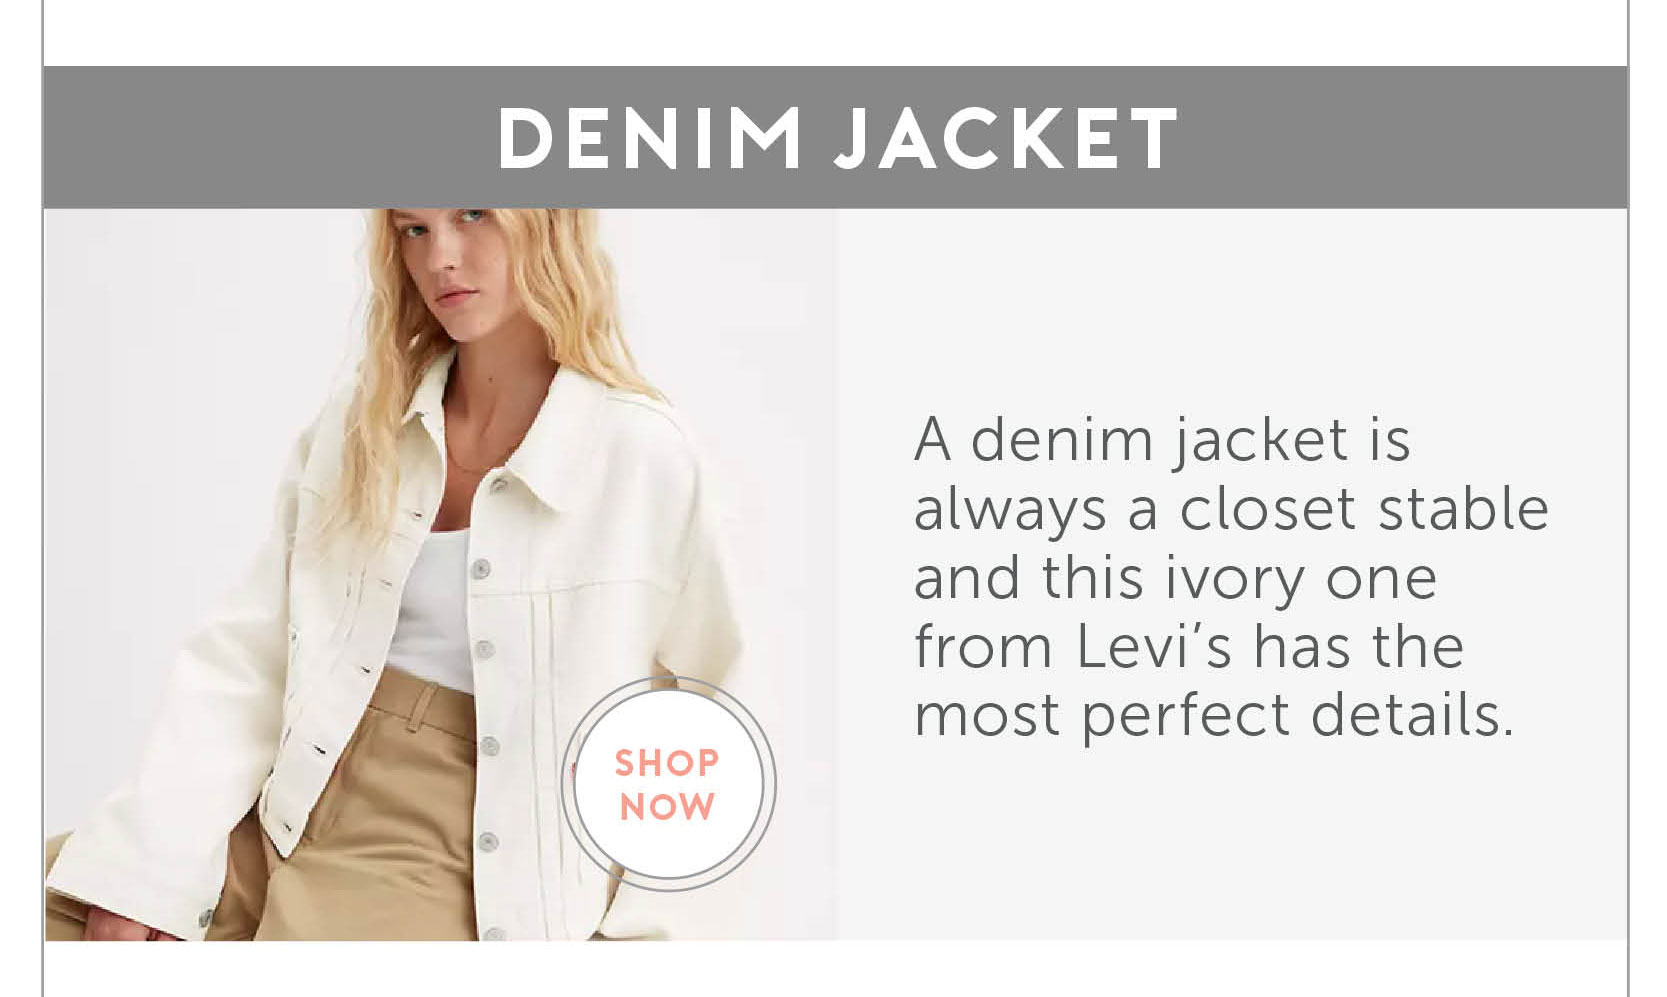 5. Denim Jacket A denim jacket is always a closet stable and this ivory one from Levi’s has the most perfect details.